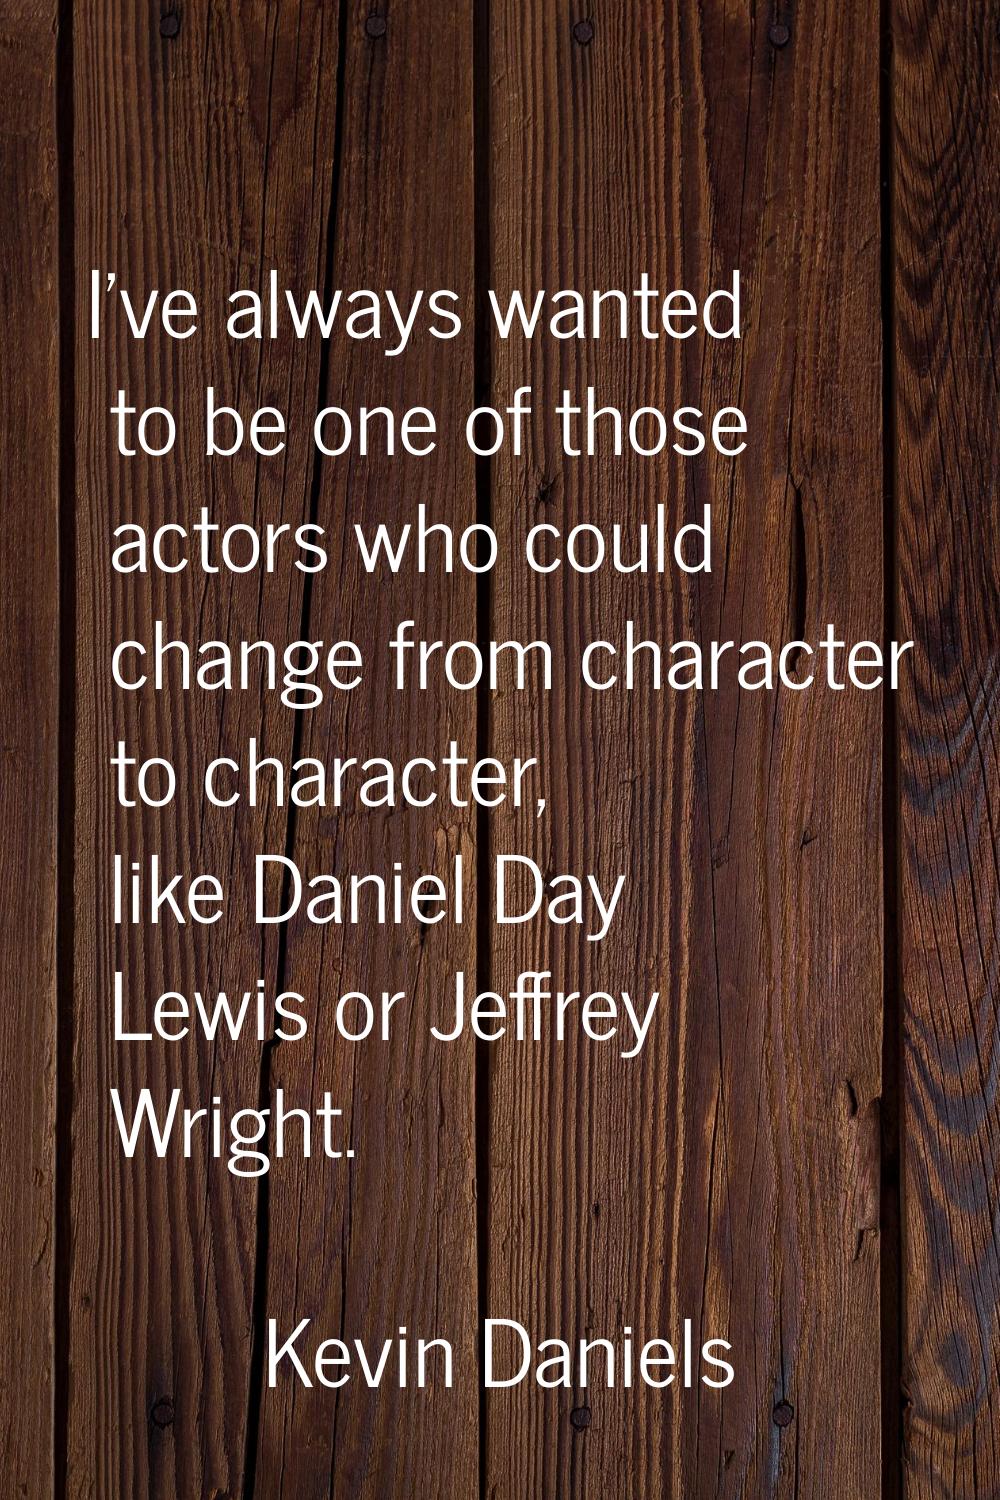 I've always wanted to be one of those actors who could change from character to character, like Dan